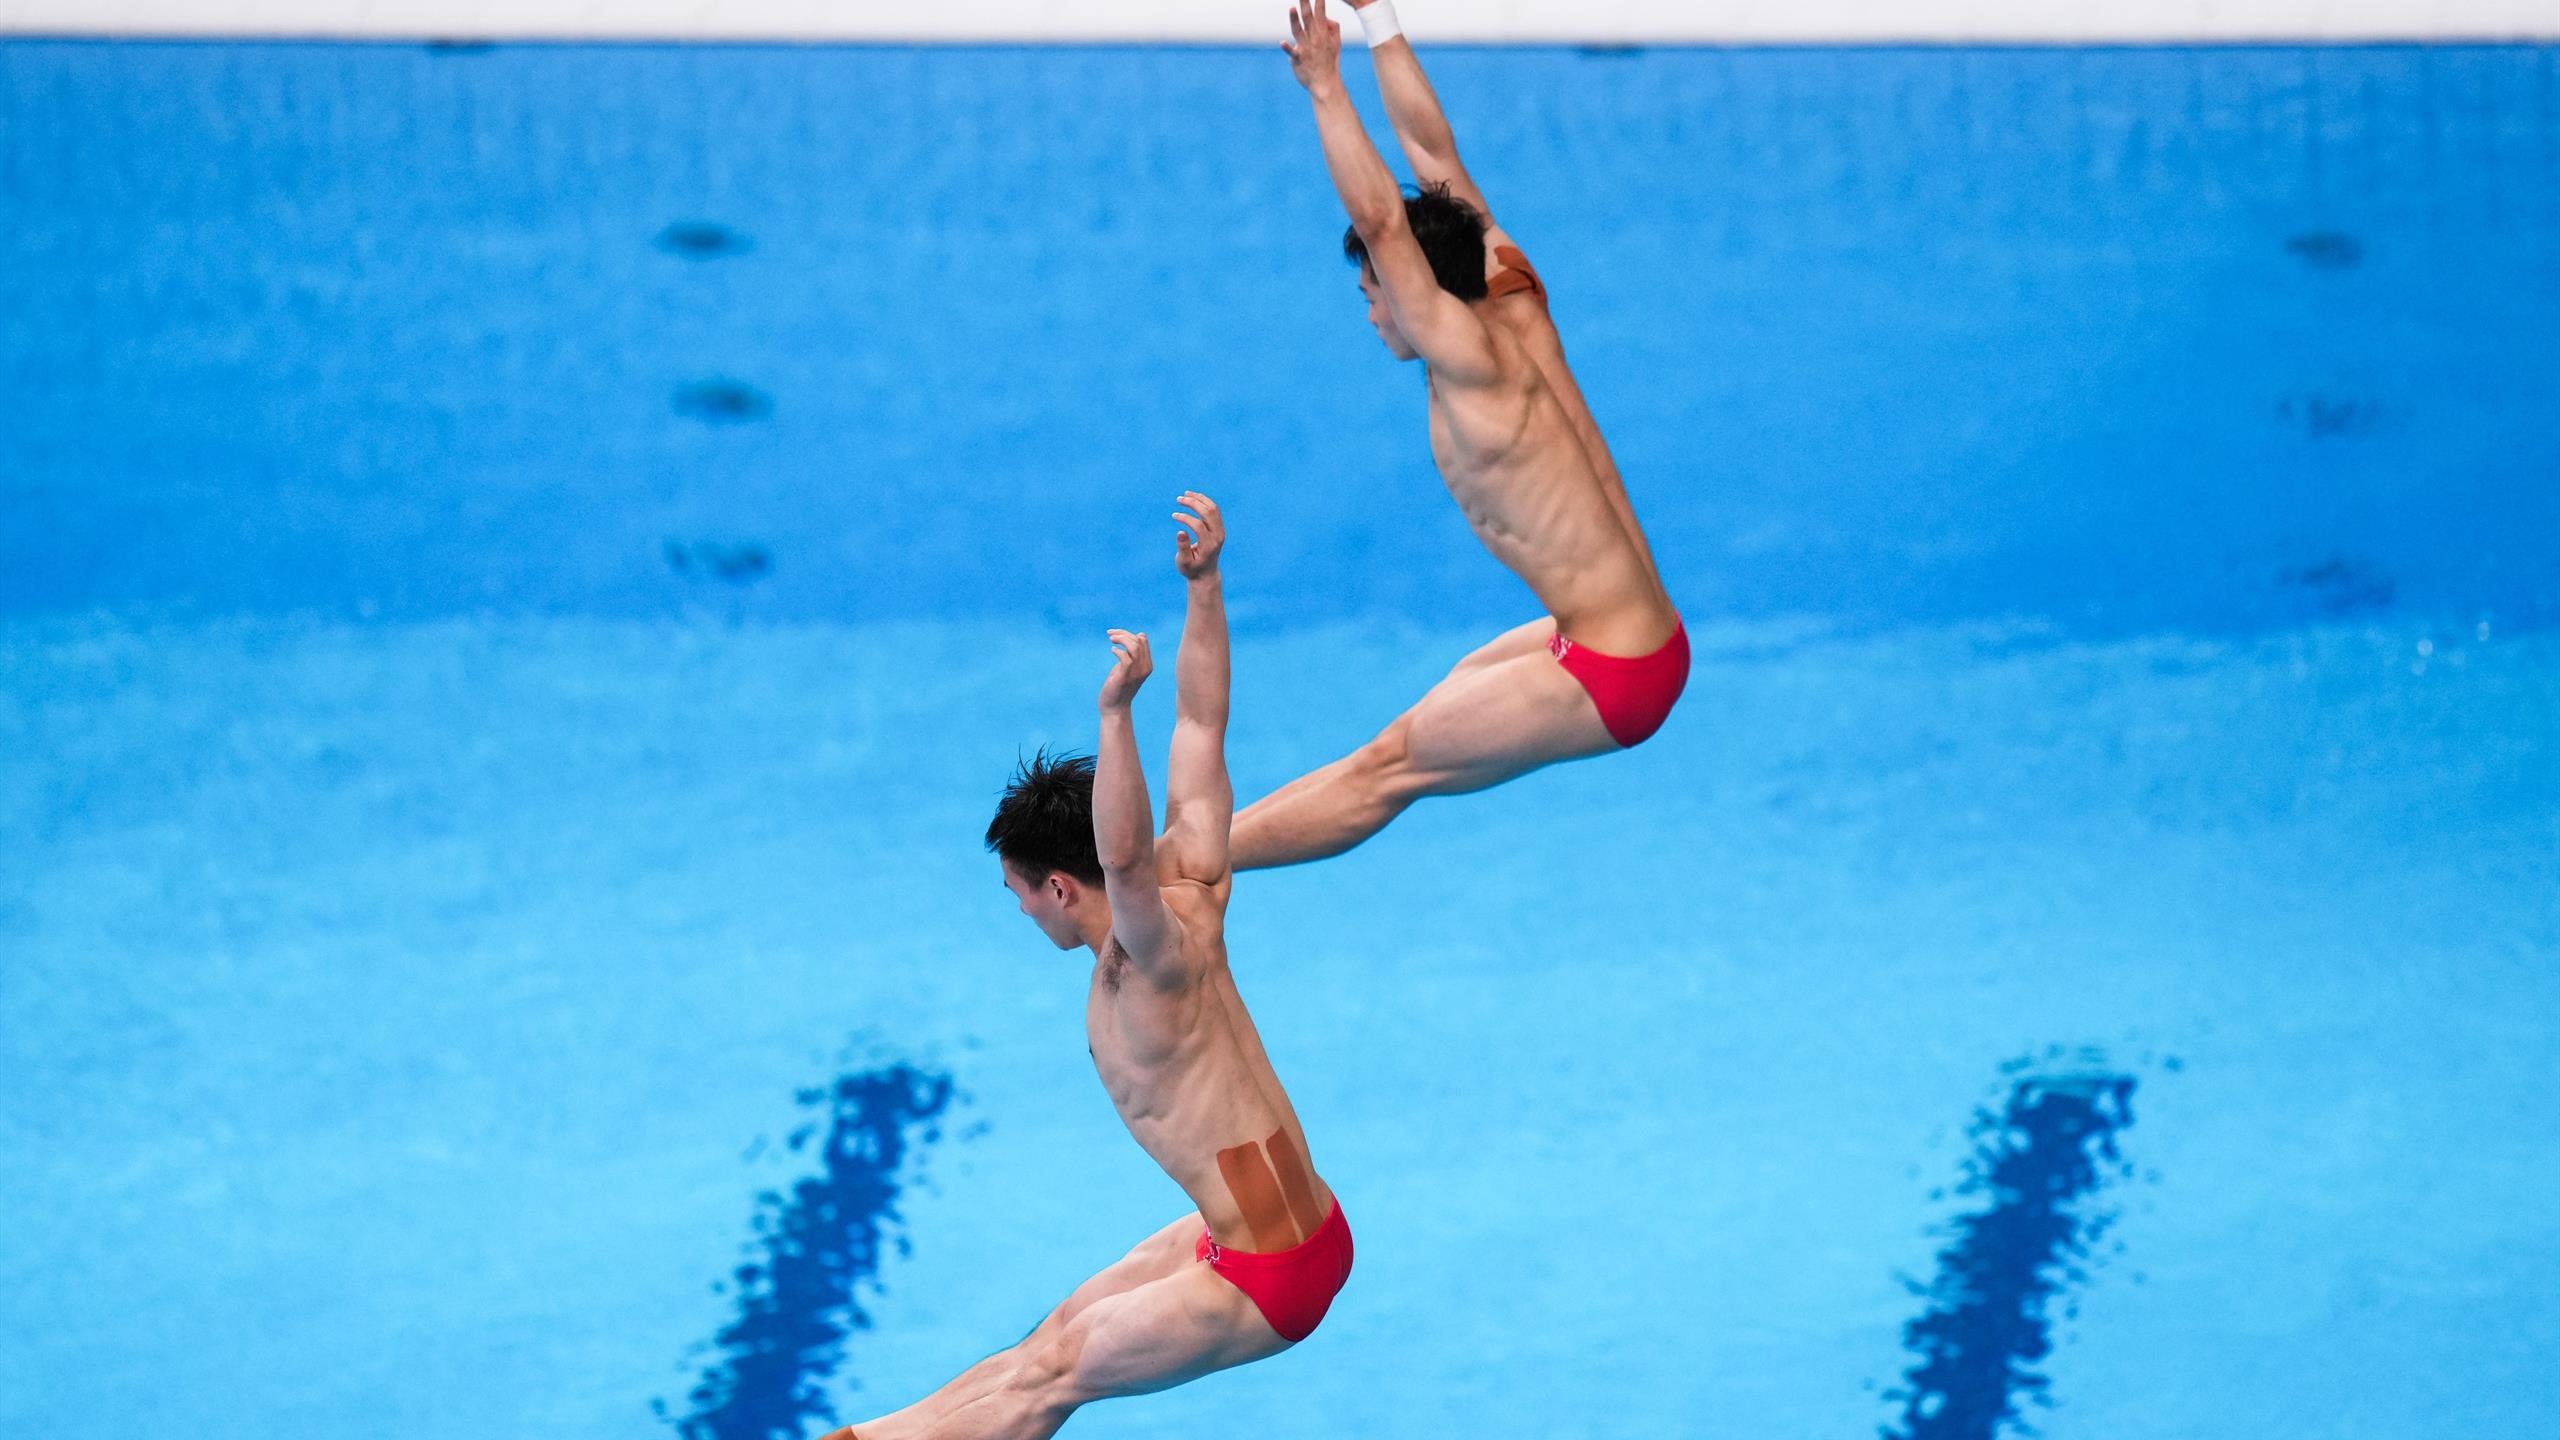 Wang Zongyuan, Team gb disappoint, Podium finishes in, Synchronised 3m springboard, 2560x1440 HD Desktop